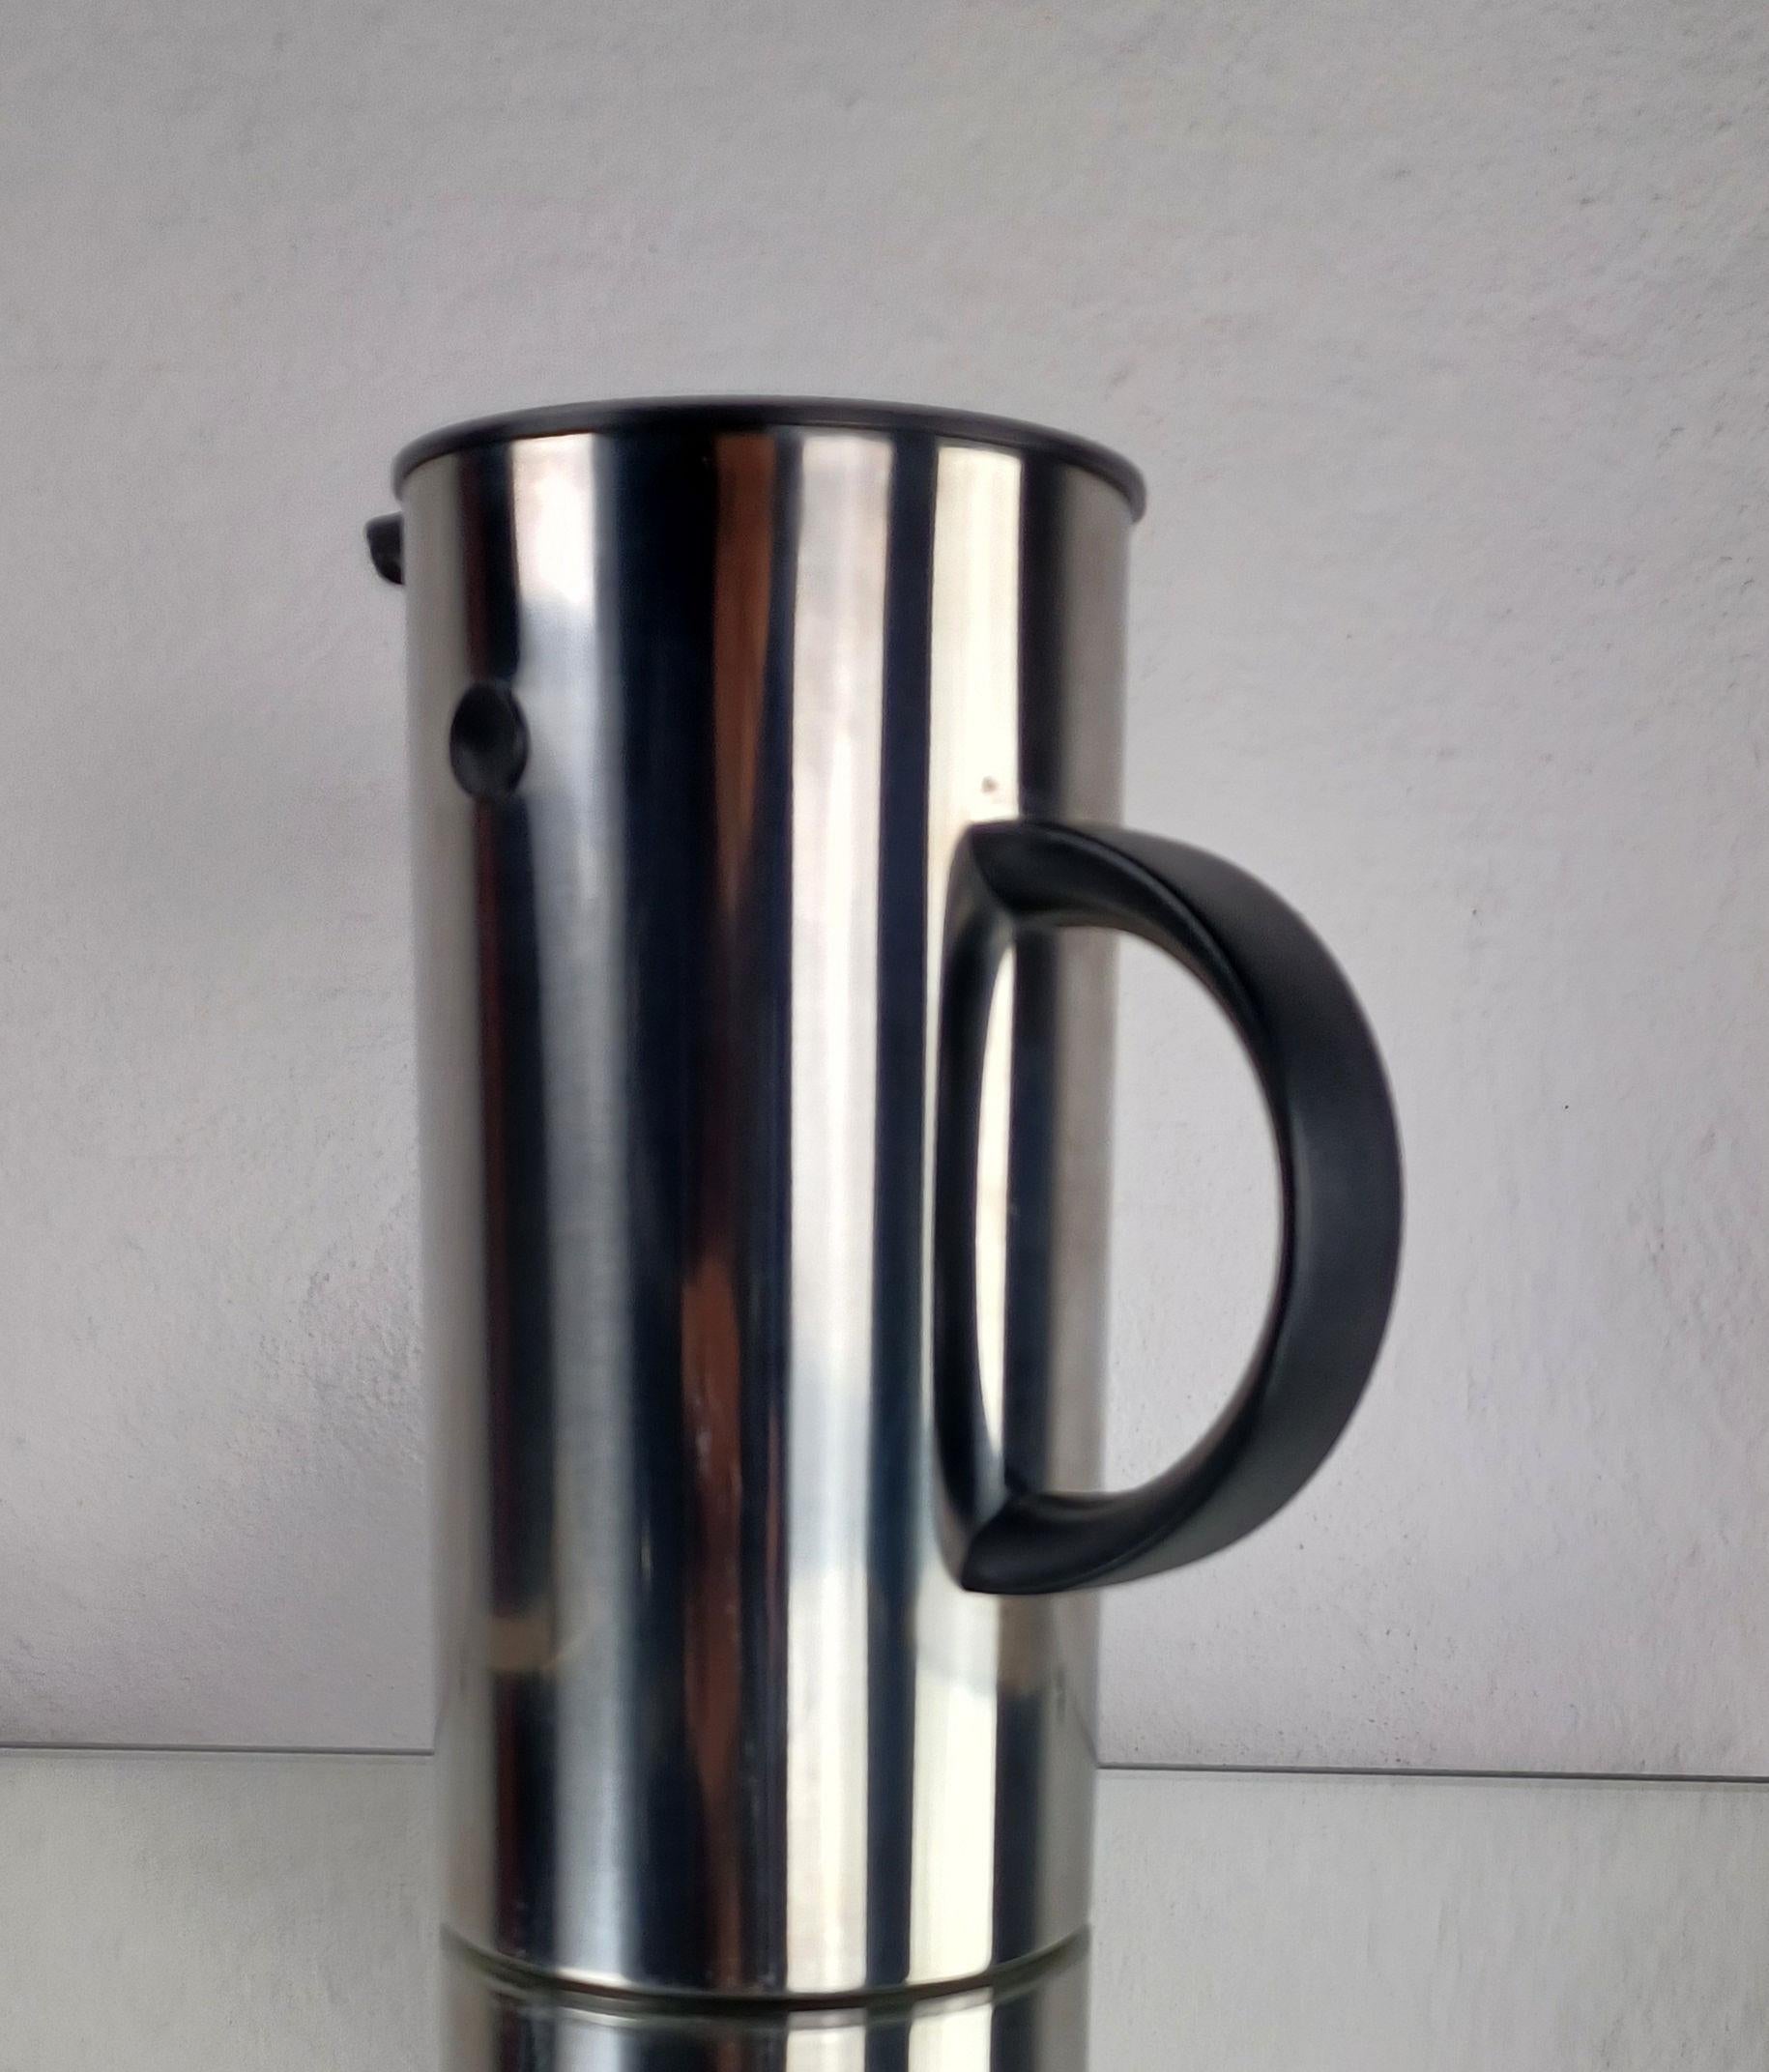 1970's Danish Erik Magnussen Thermo Jug by Stelton

Timeless small thermo jug in futuristic minilalist style designed by Erik Magnussen for Stelton in 1977.  

The thermo jug is in good vintage condition.
